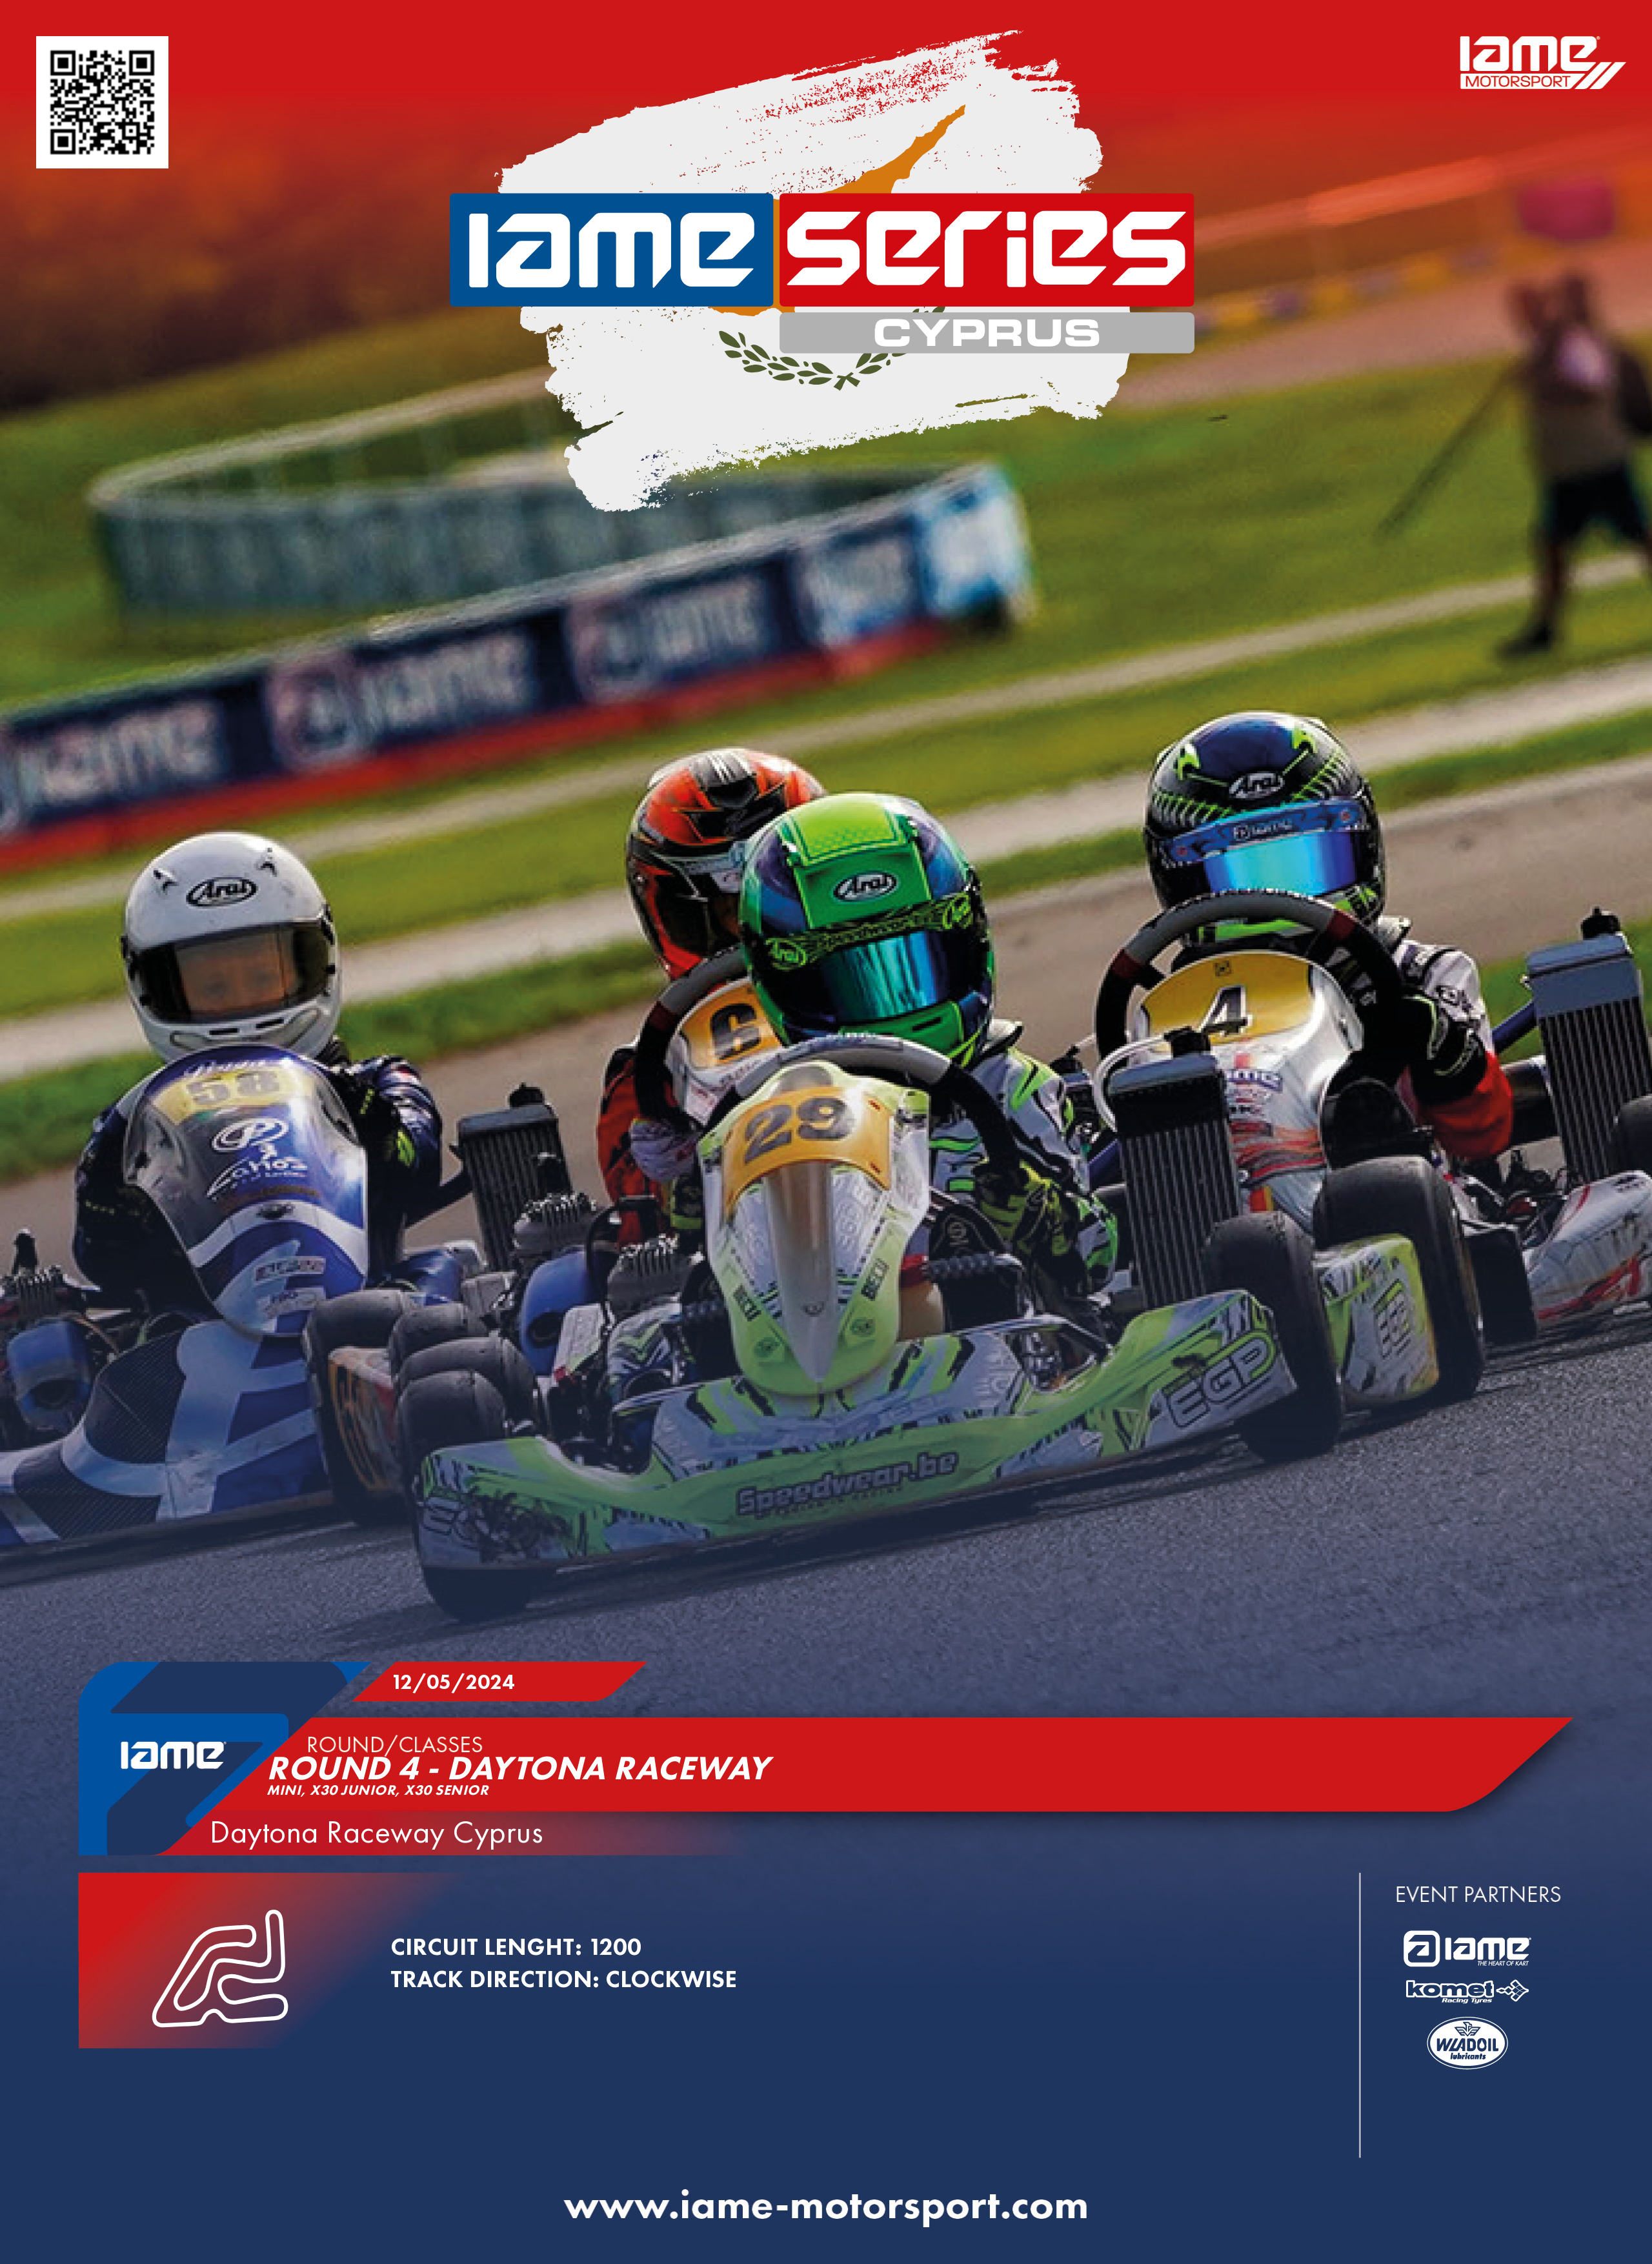 Round 4 of the Iame Series Cyprus at Daytona Raceway: Get Ready for a Thrilling Karting Event!